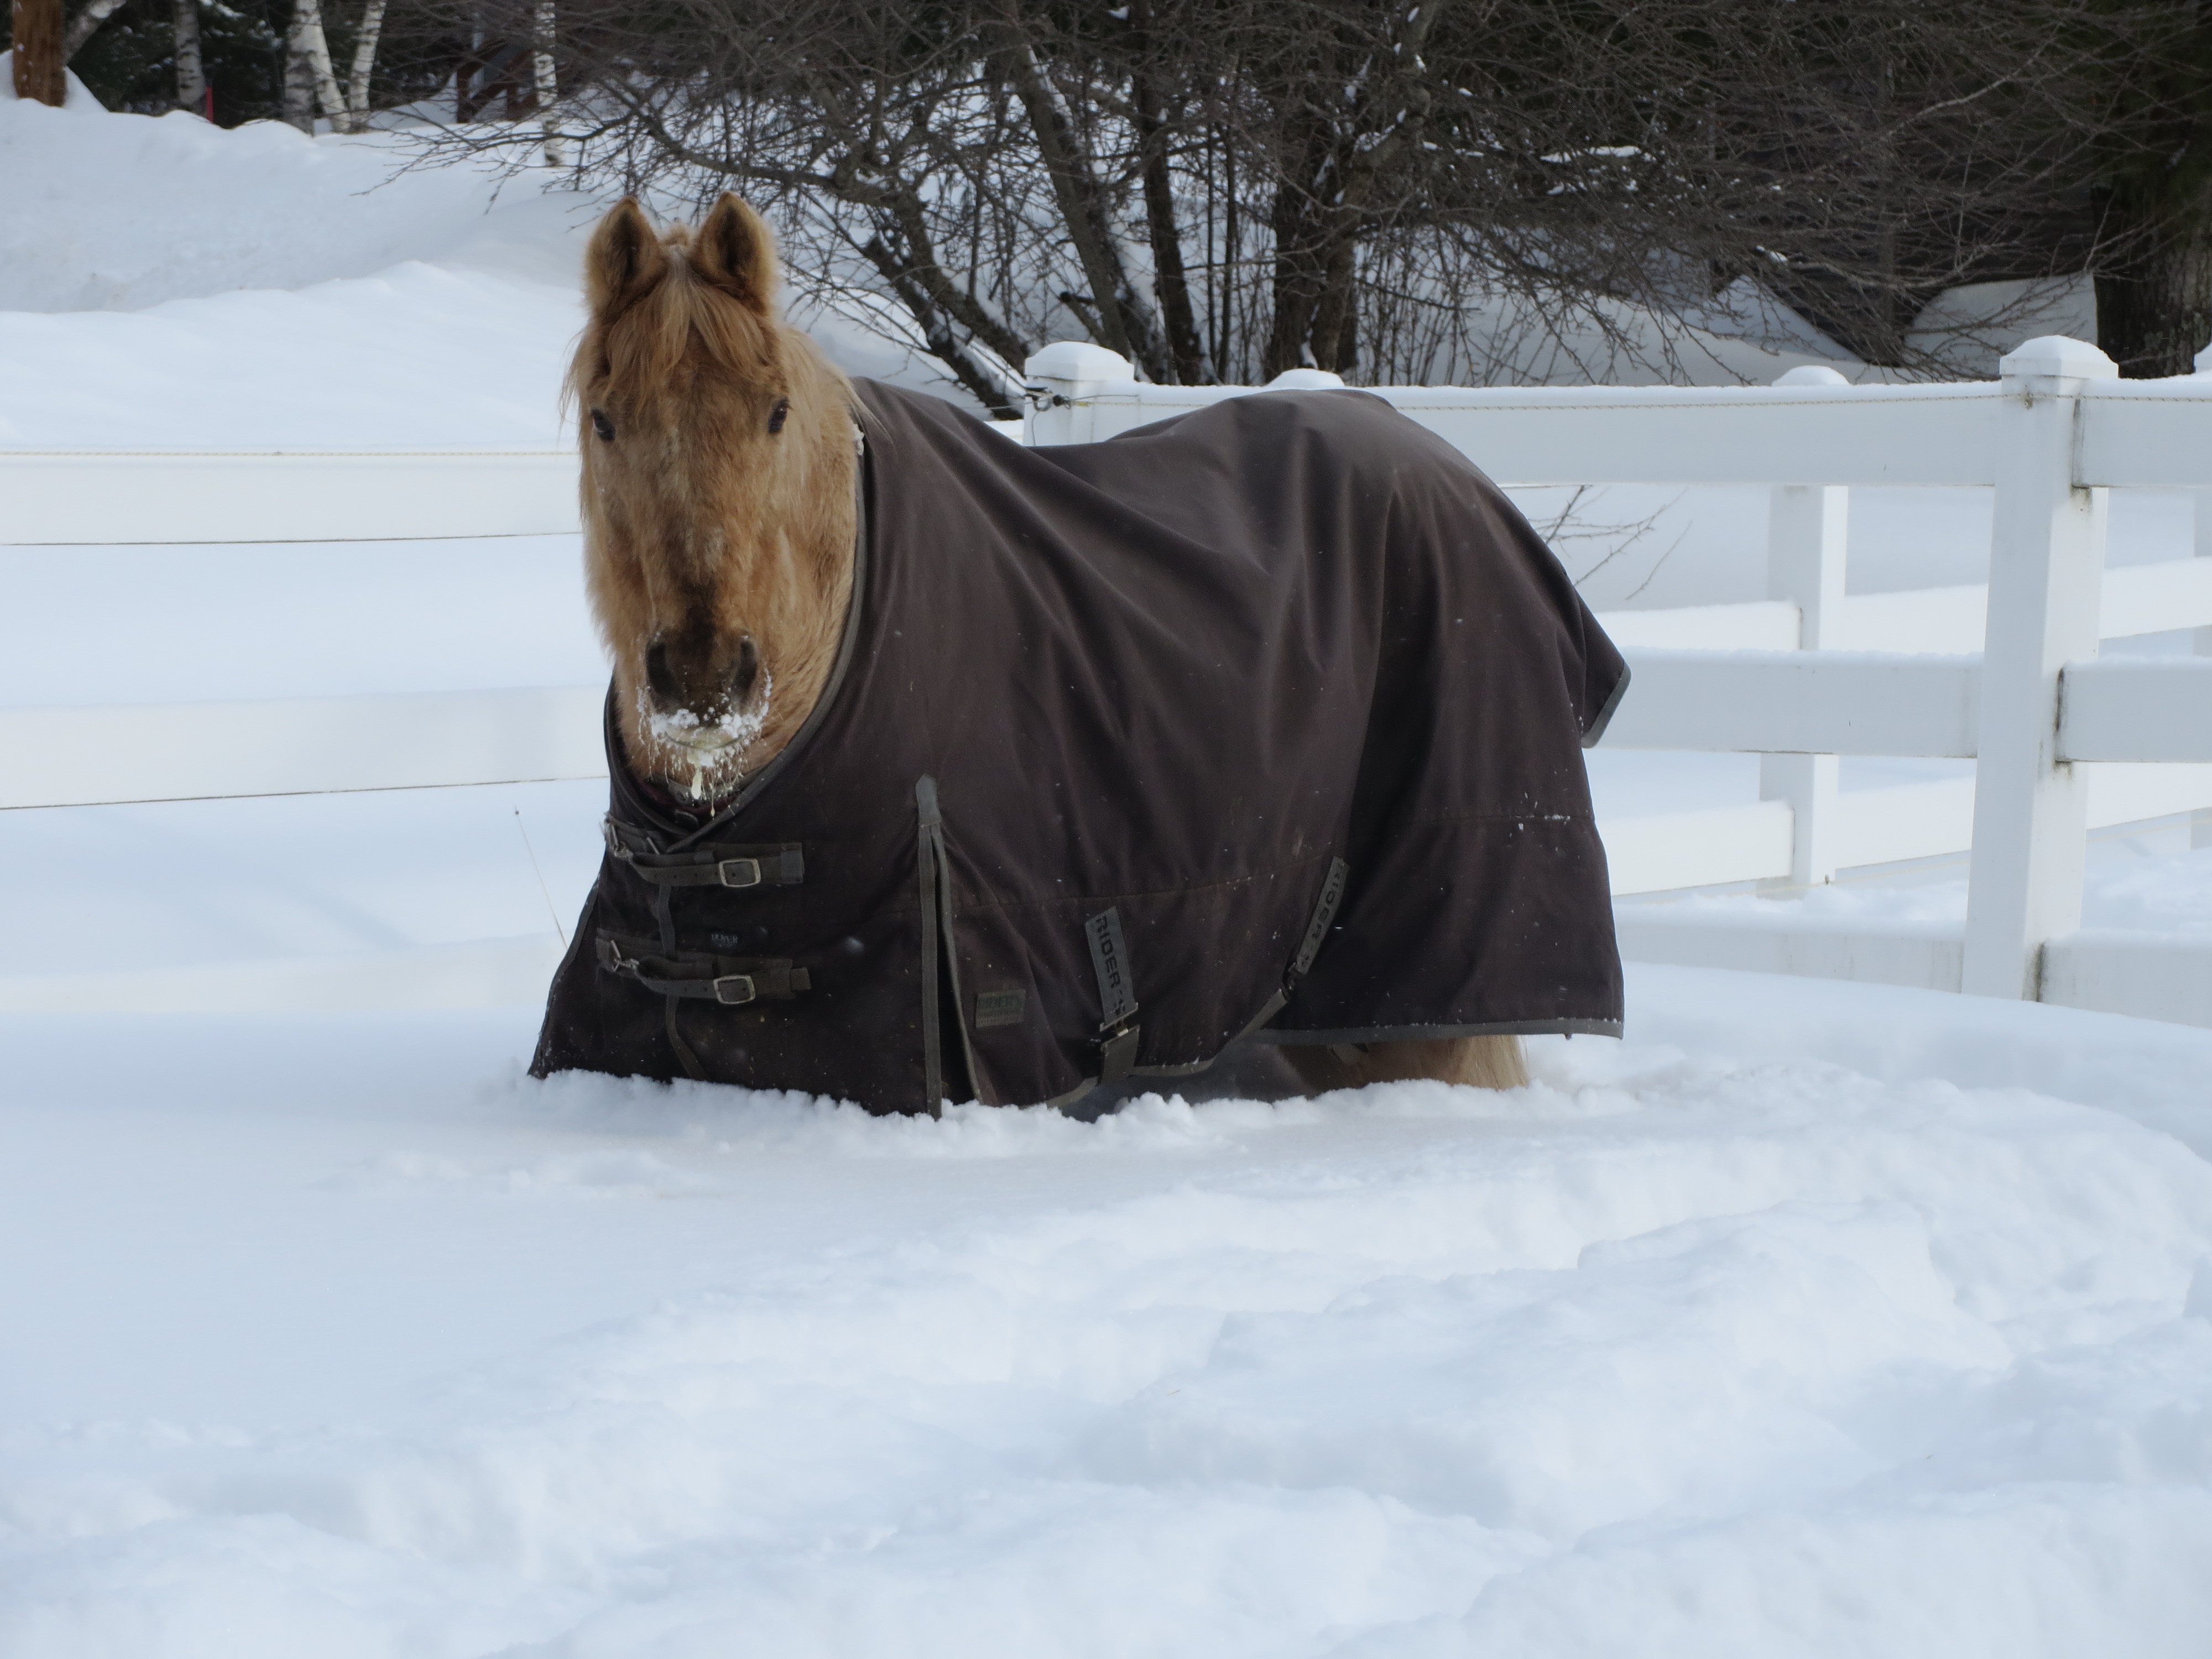 Carmel enjoying some time outside after the Blizzard of 2015. 